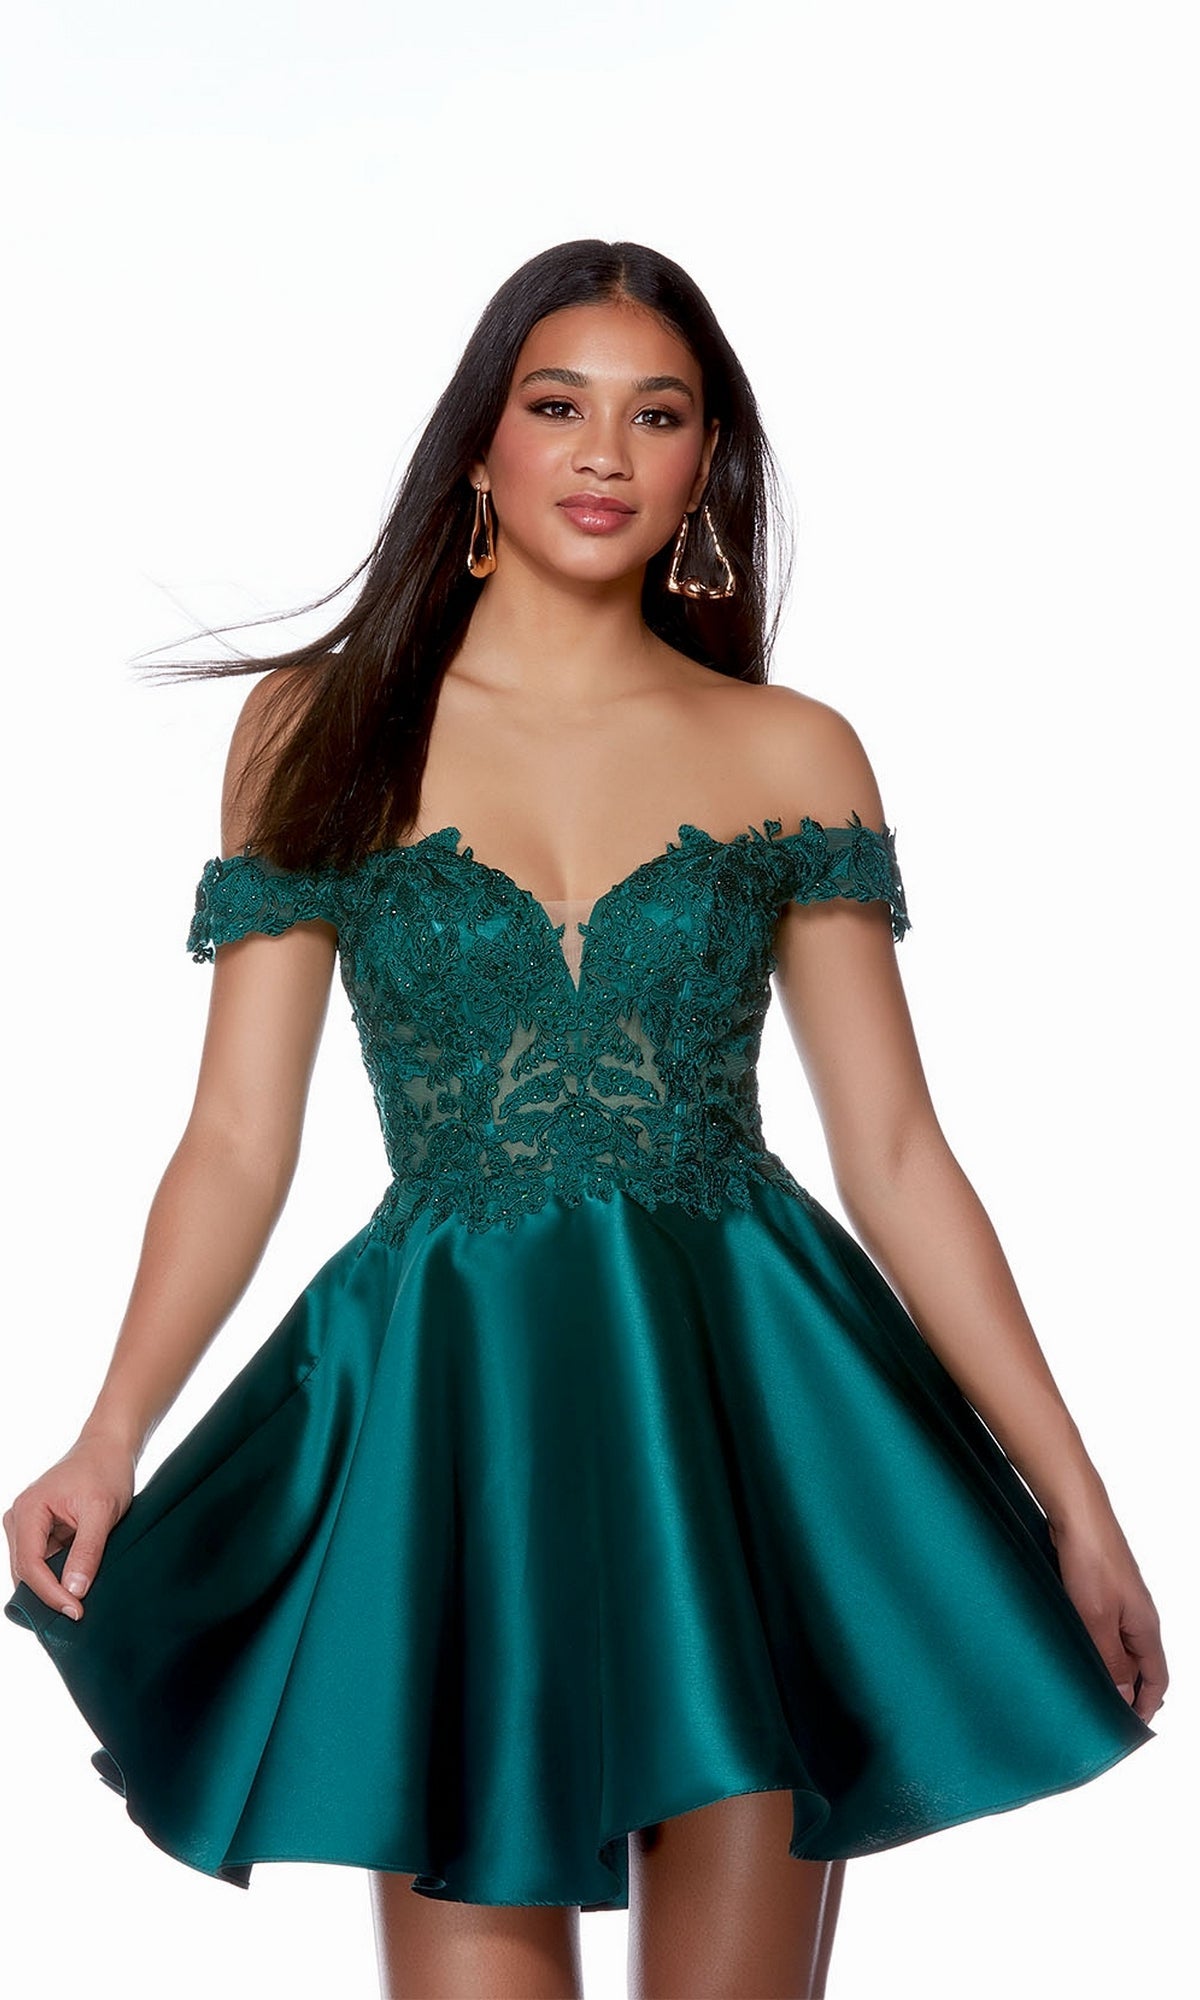 Pine Short Dress By Alyce For Homecoming 3141